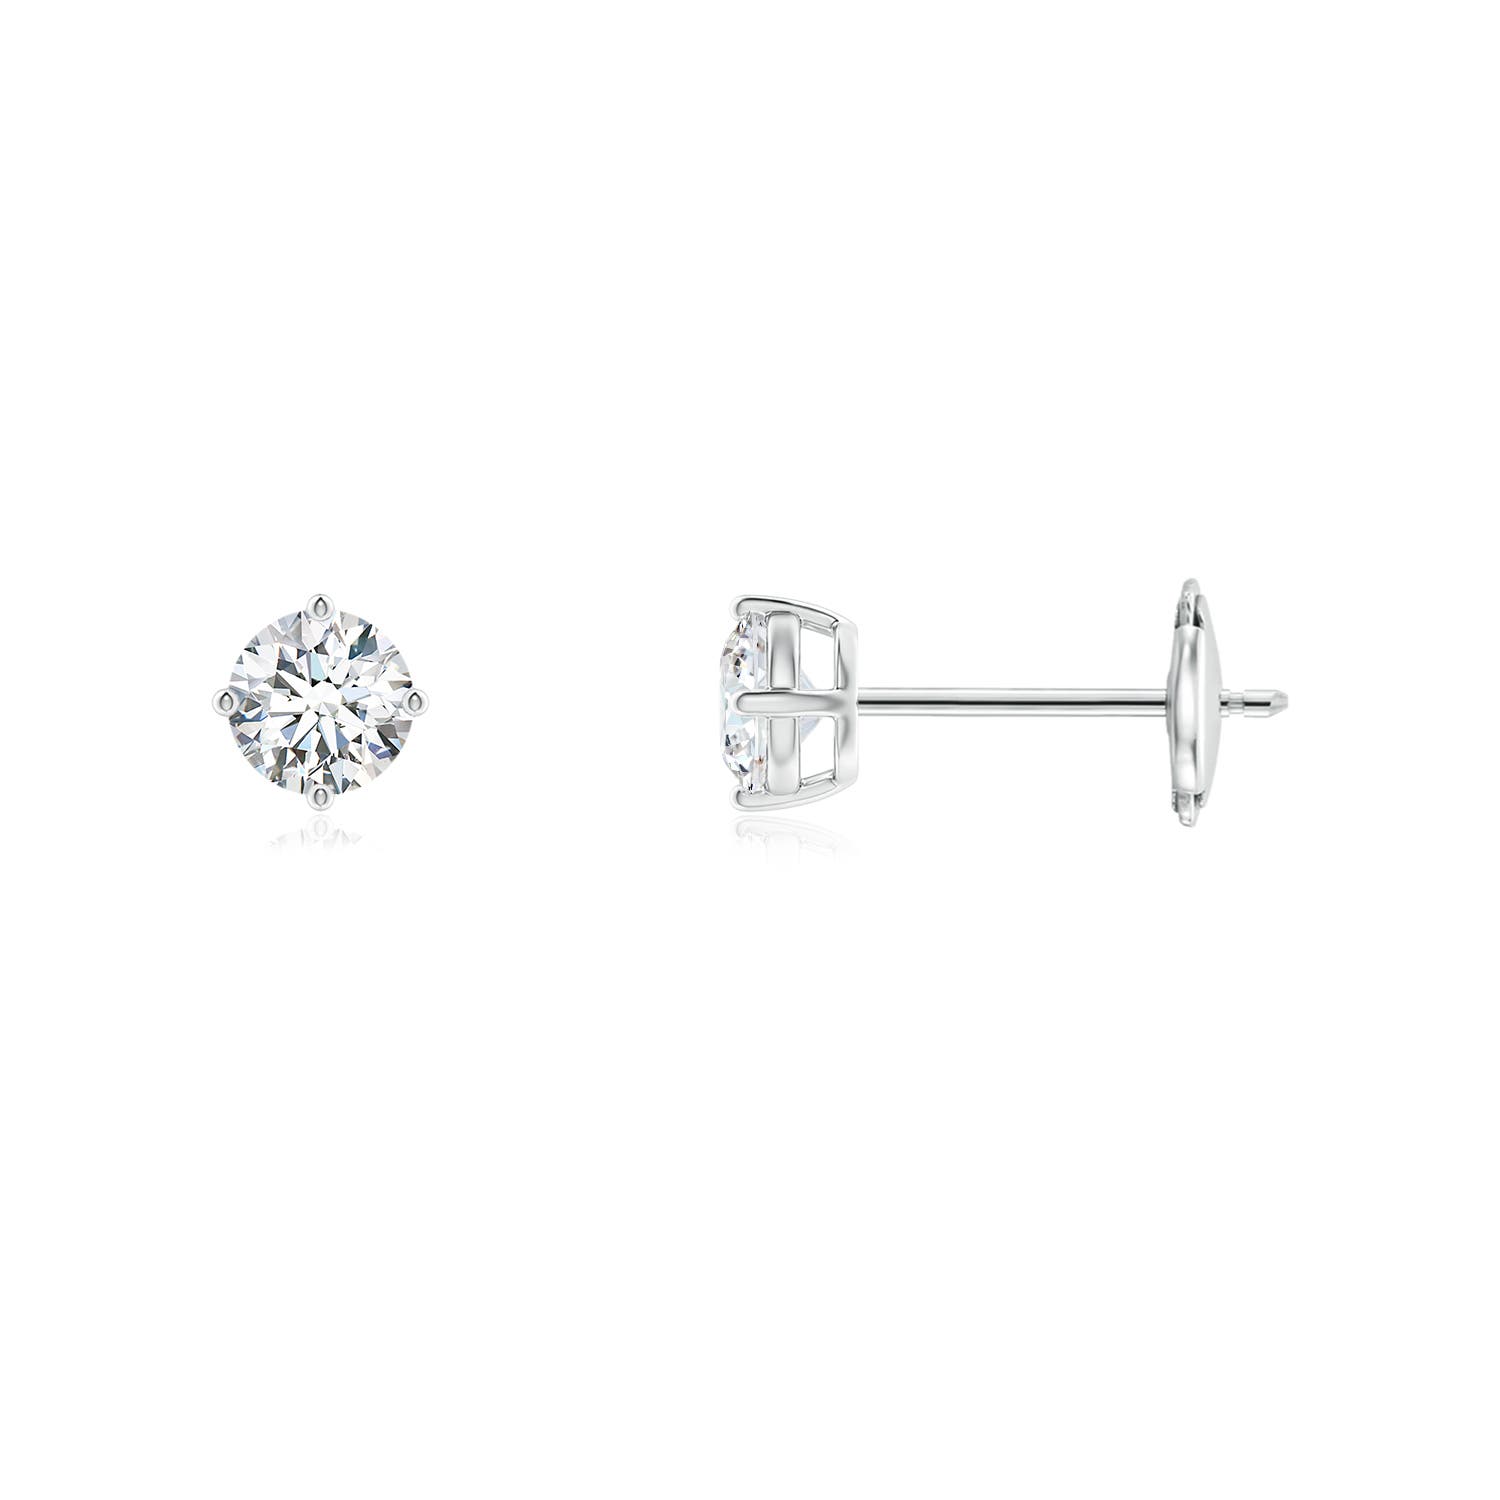 Aggregate more than 297 simple white gold stud earrings